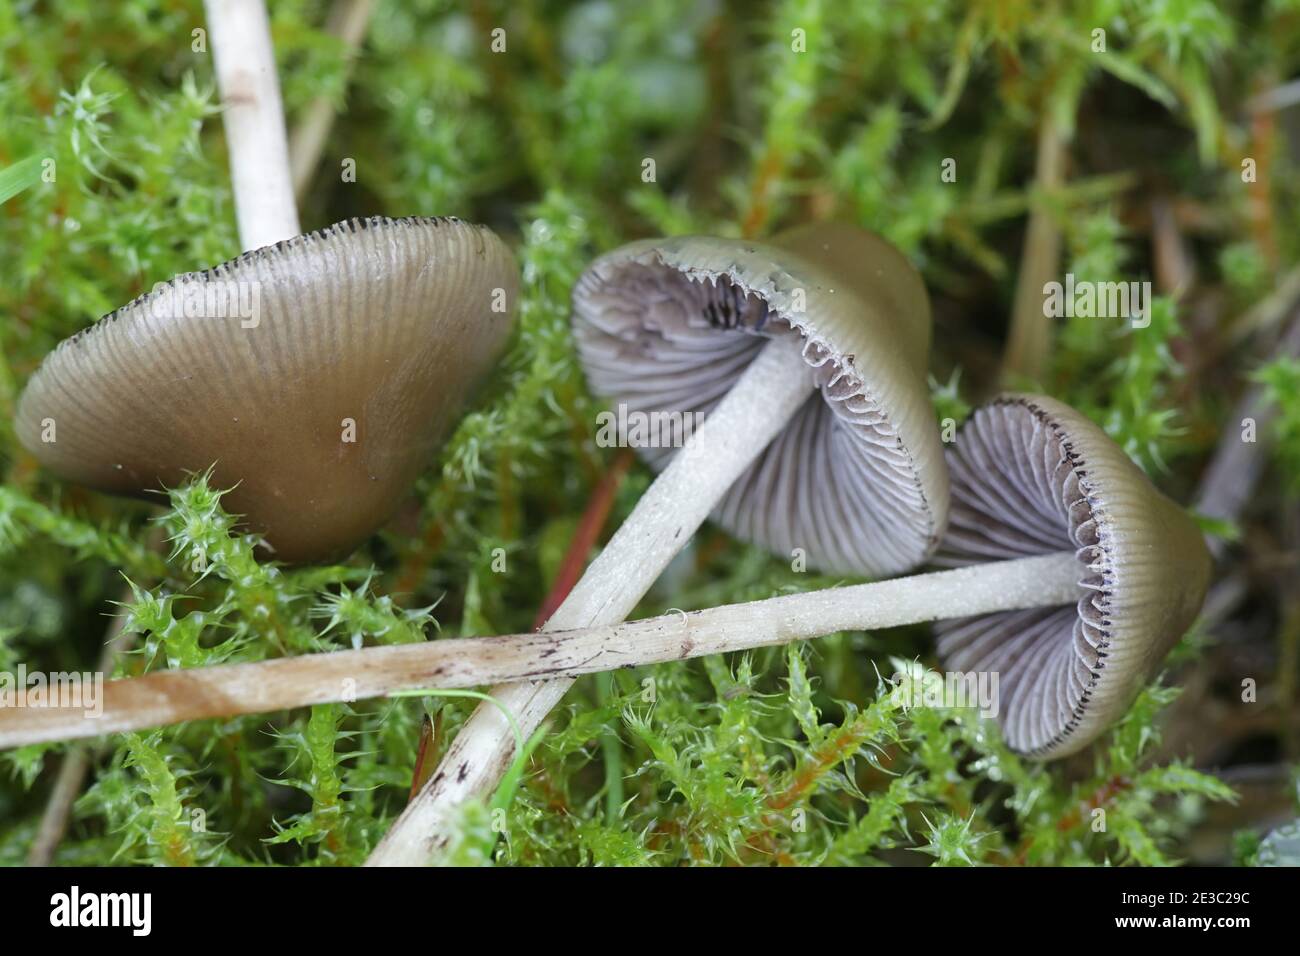 Psilocybe semilanceata, commonly known as liberty bell or magic mushroom, hallucinogenic mushroom from Finland Stock Photo